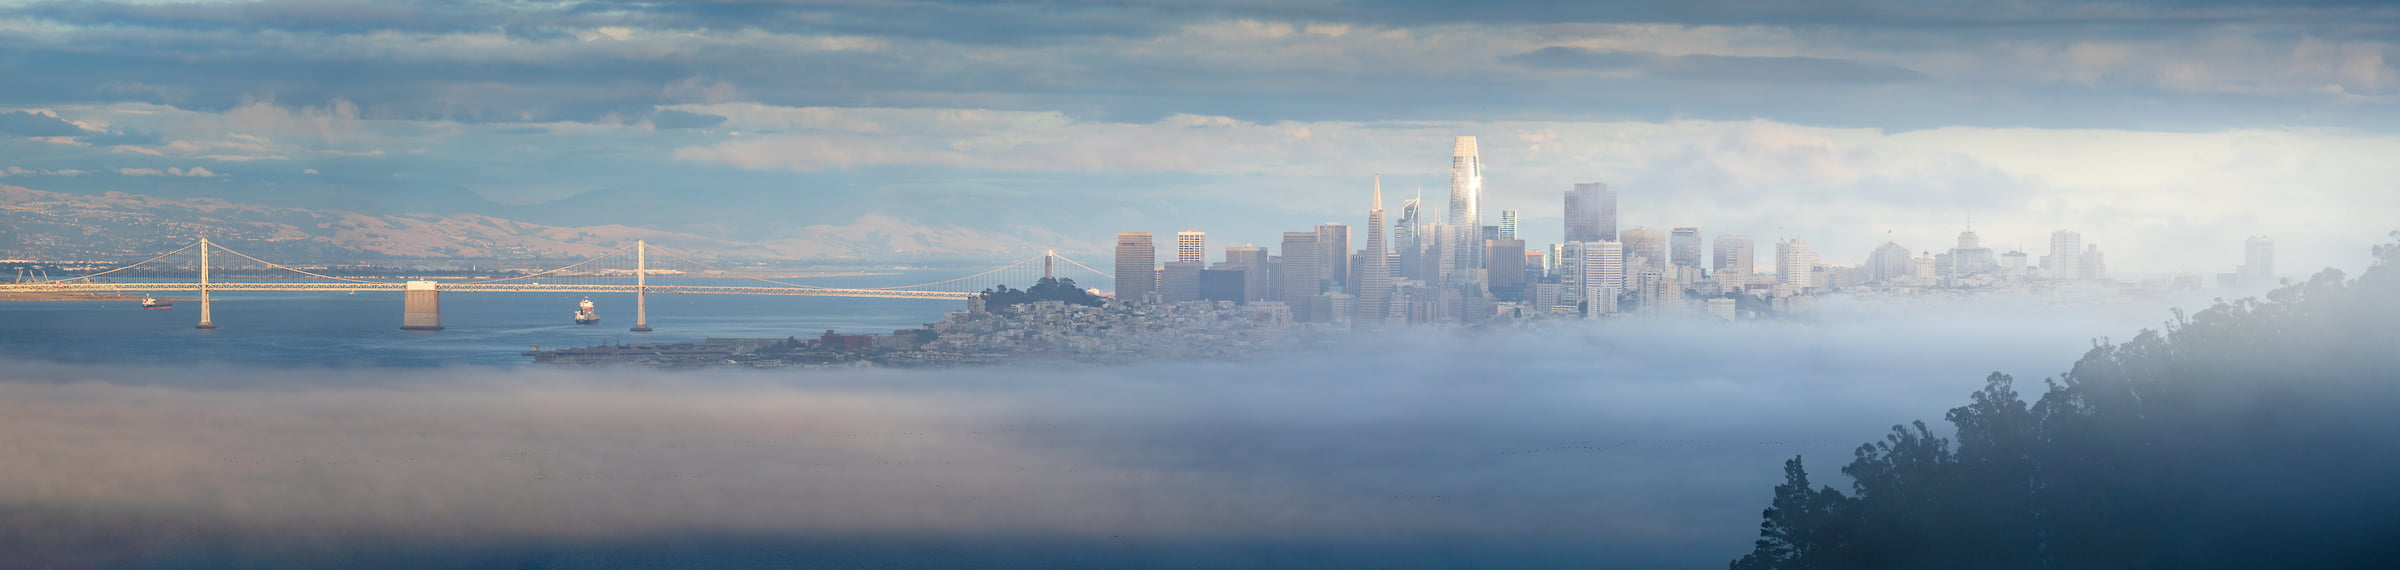 156 megapixels! A very high resolution, large-format VAST photo print of the San Francisco skyline with fog; cityscape photograph created by Jeff Lewis in San Francisco, California